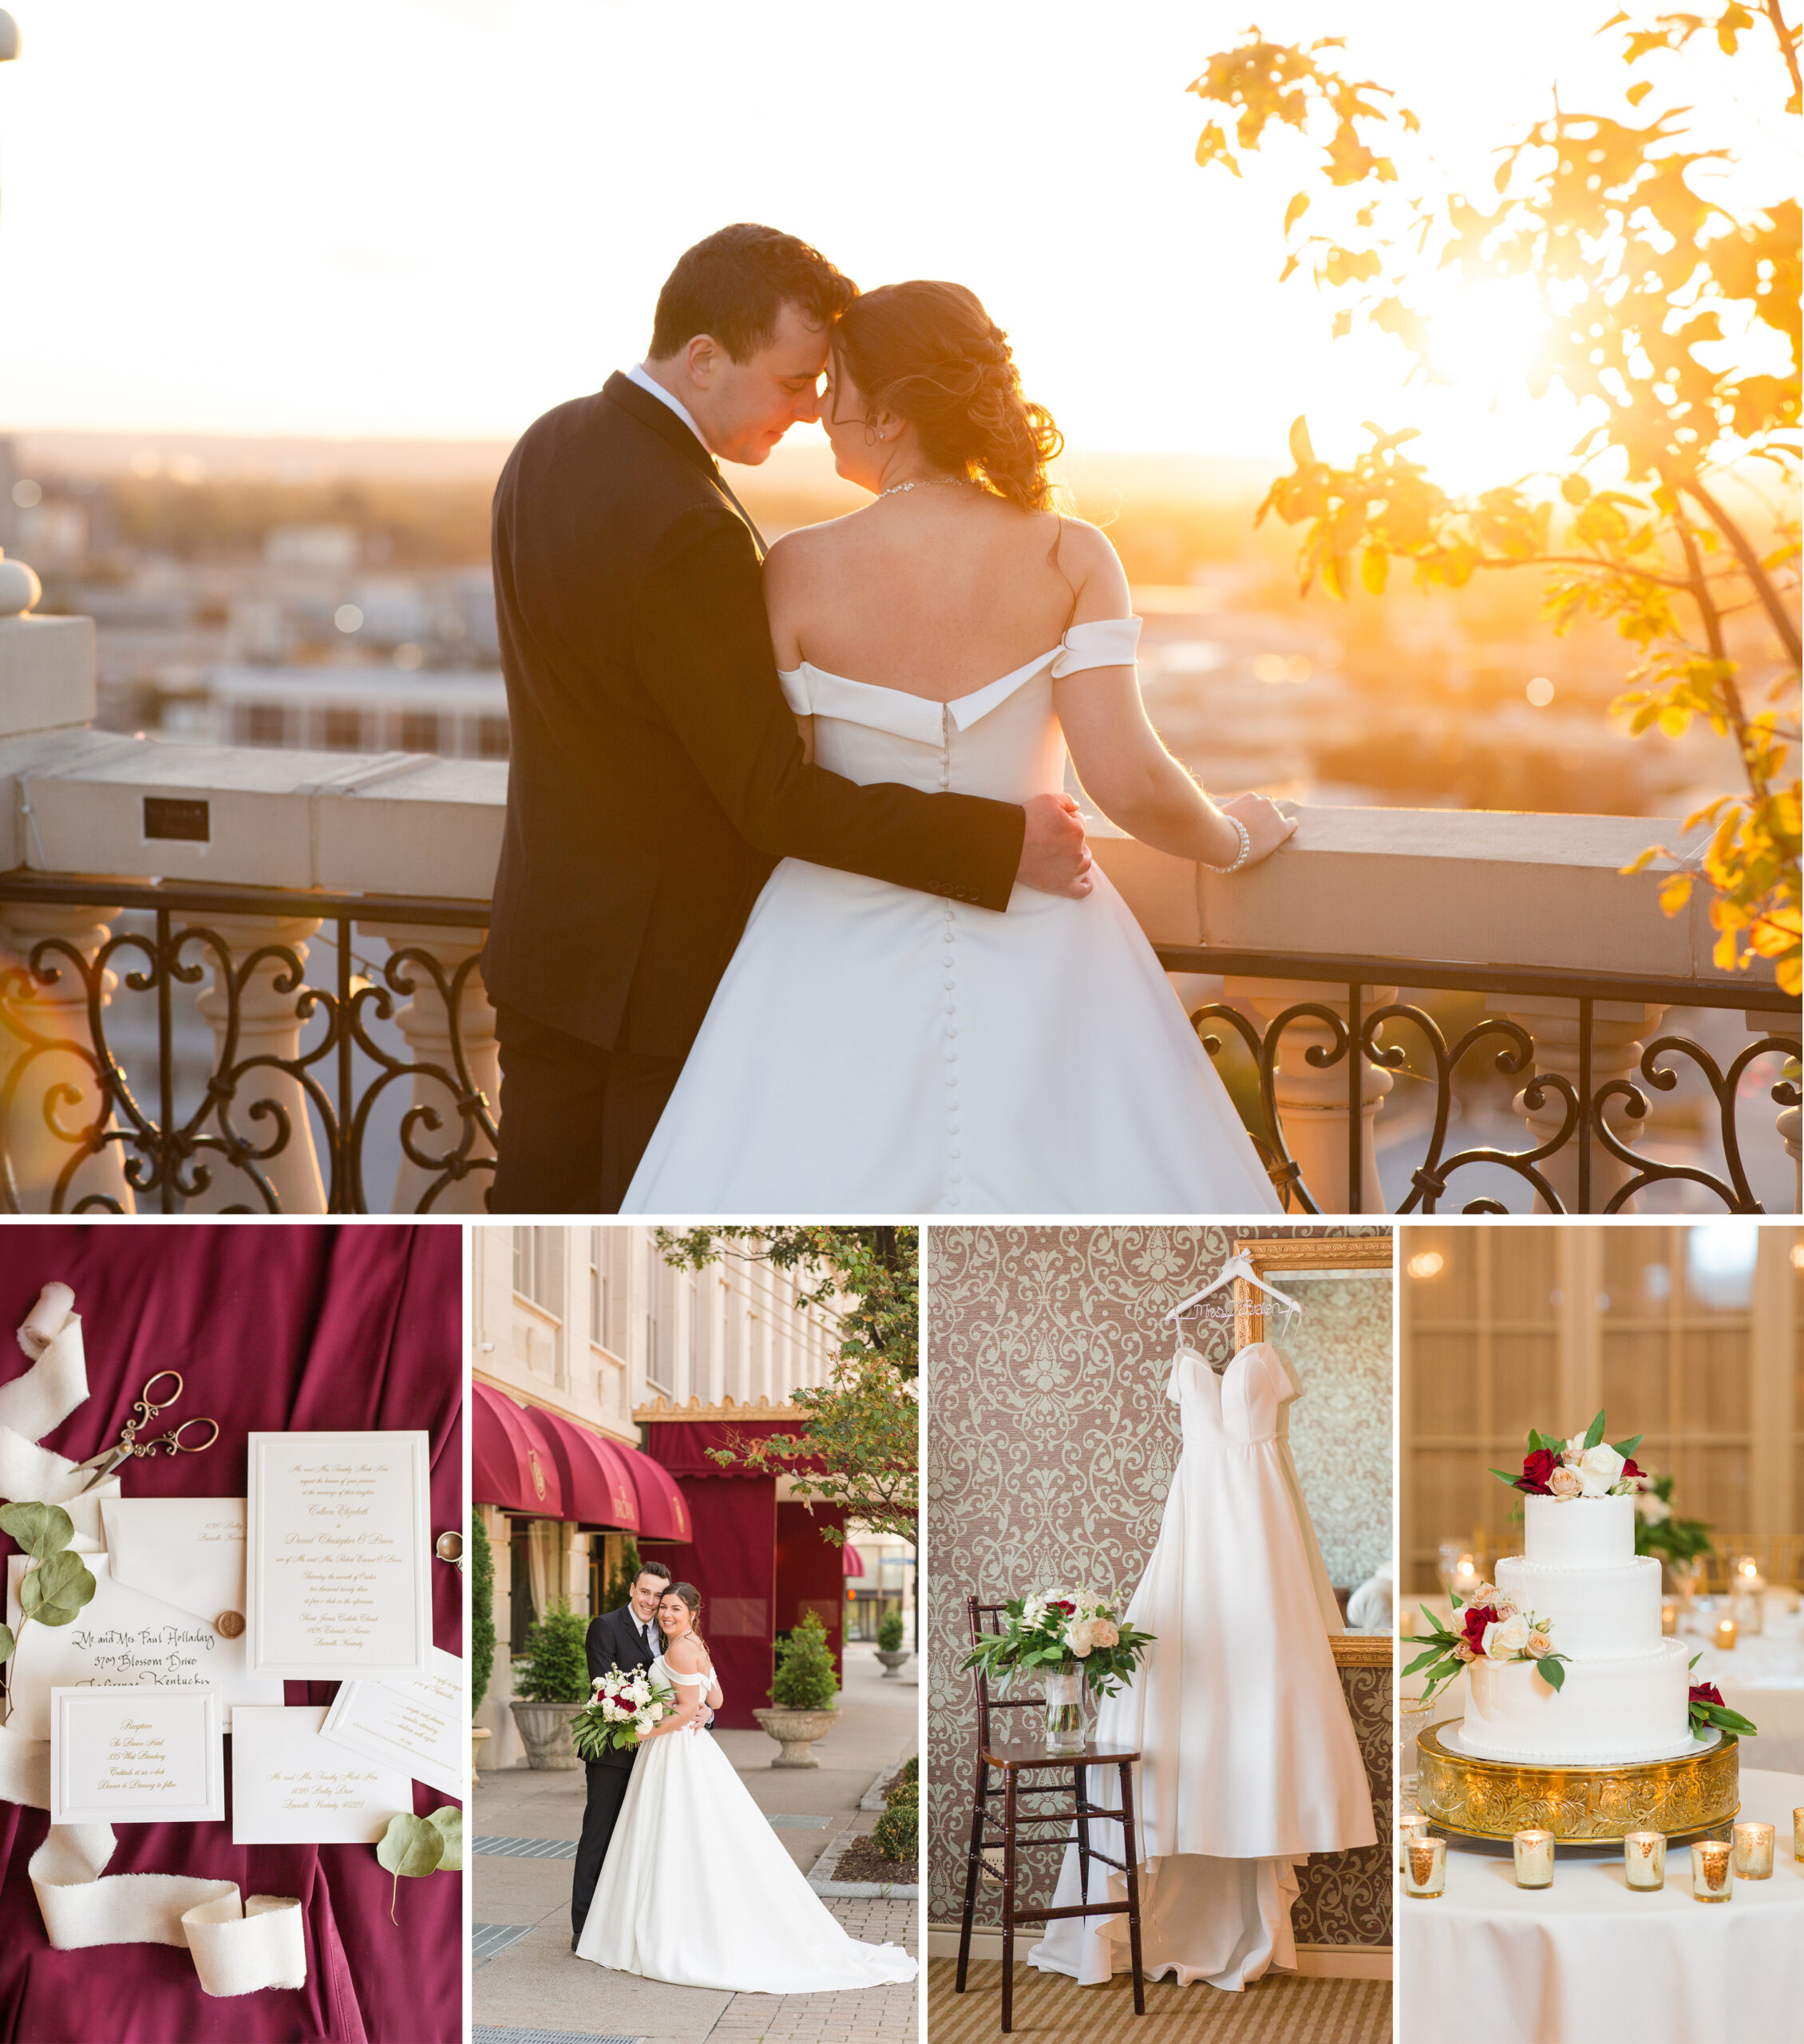 Sunset rooftop wedding at the Brown Hotel in Lousville Kentucky